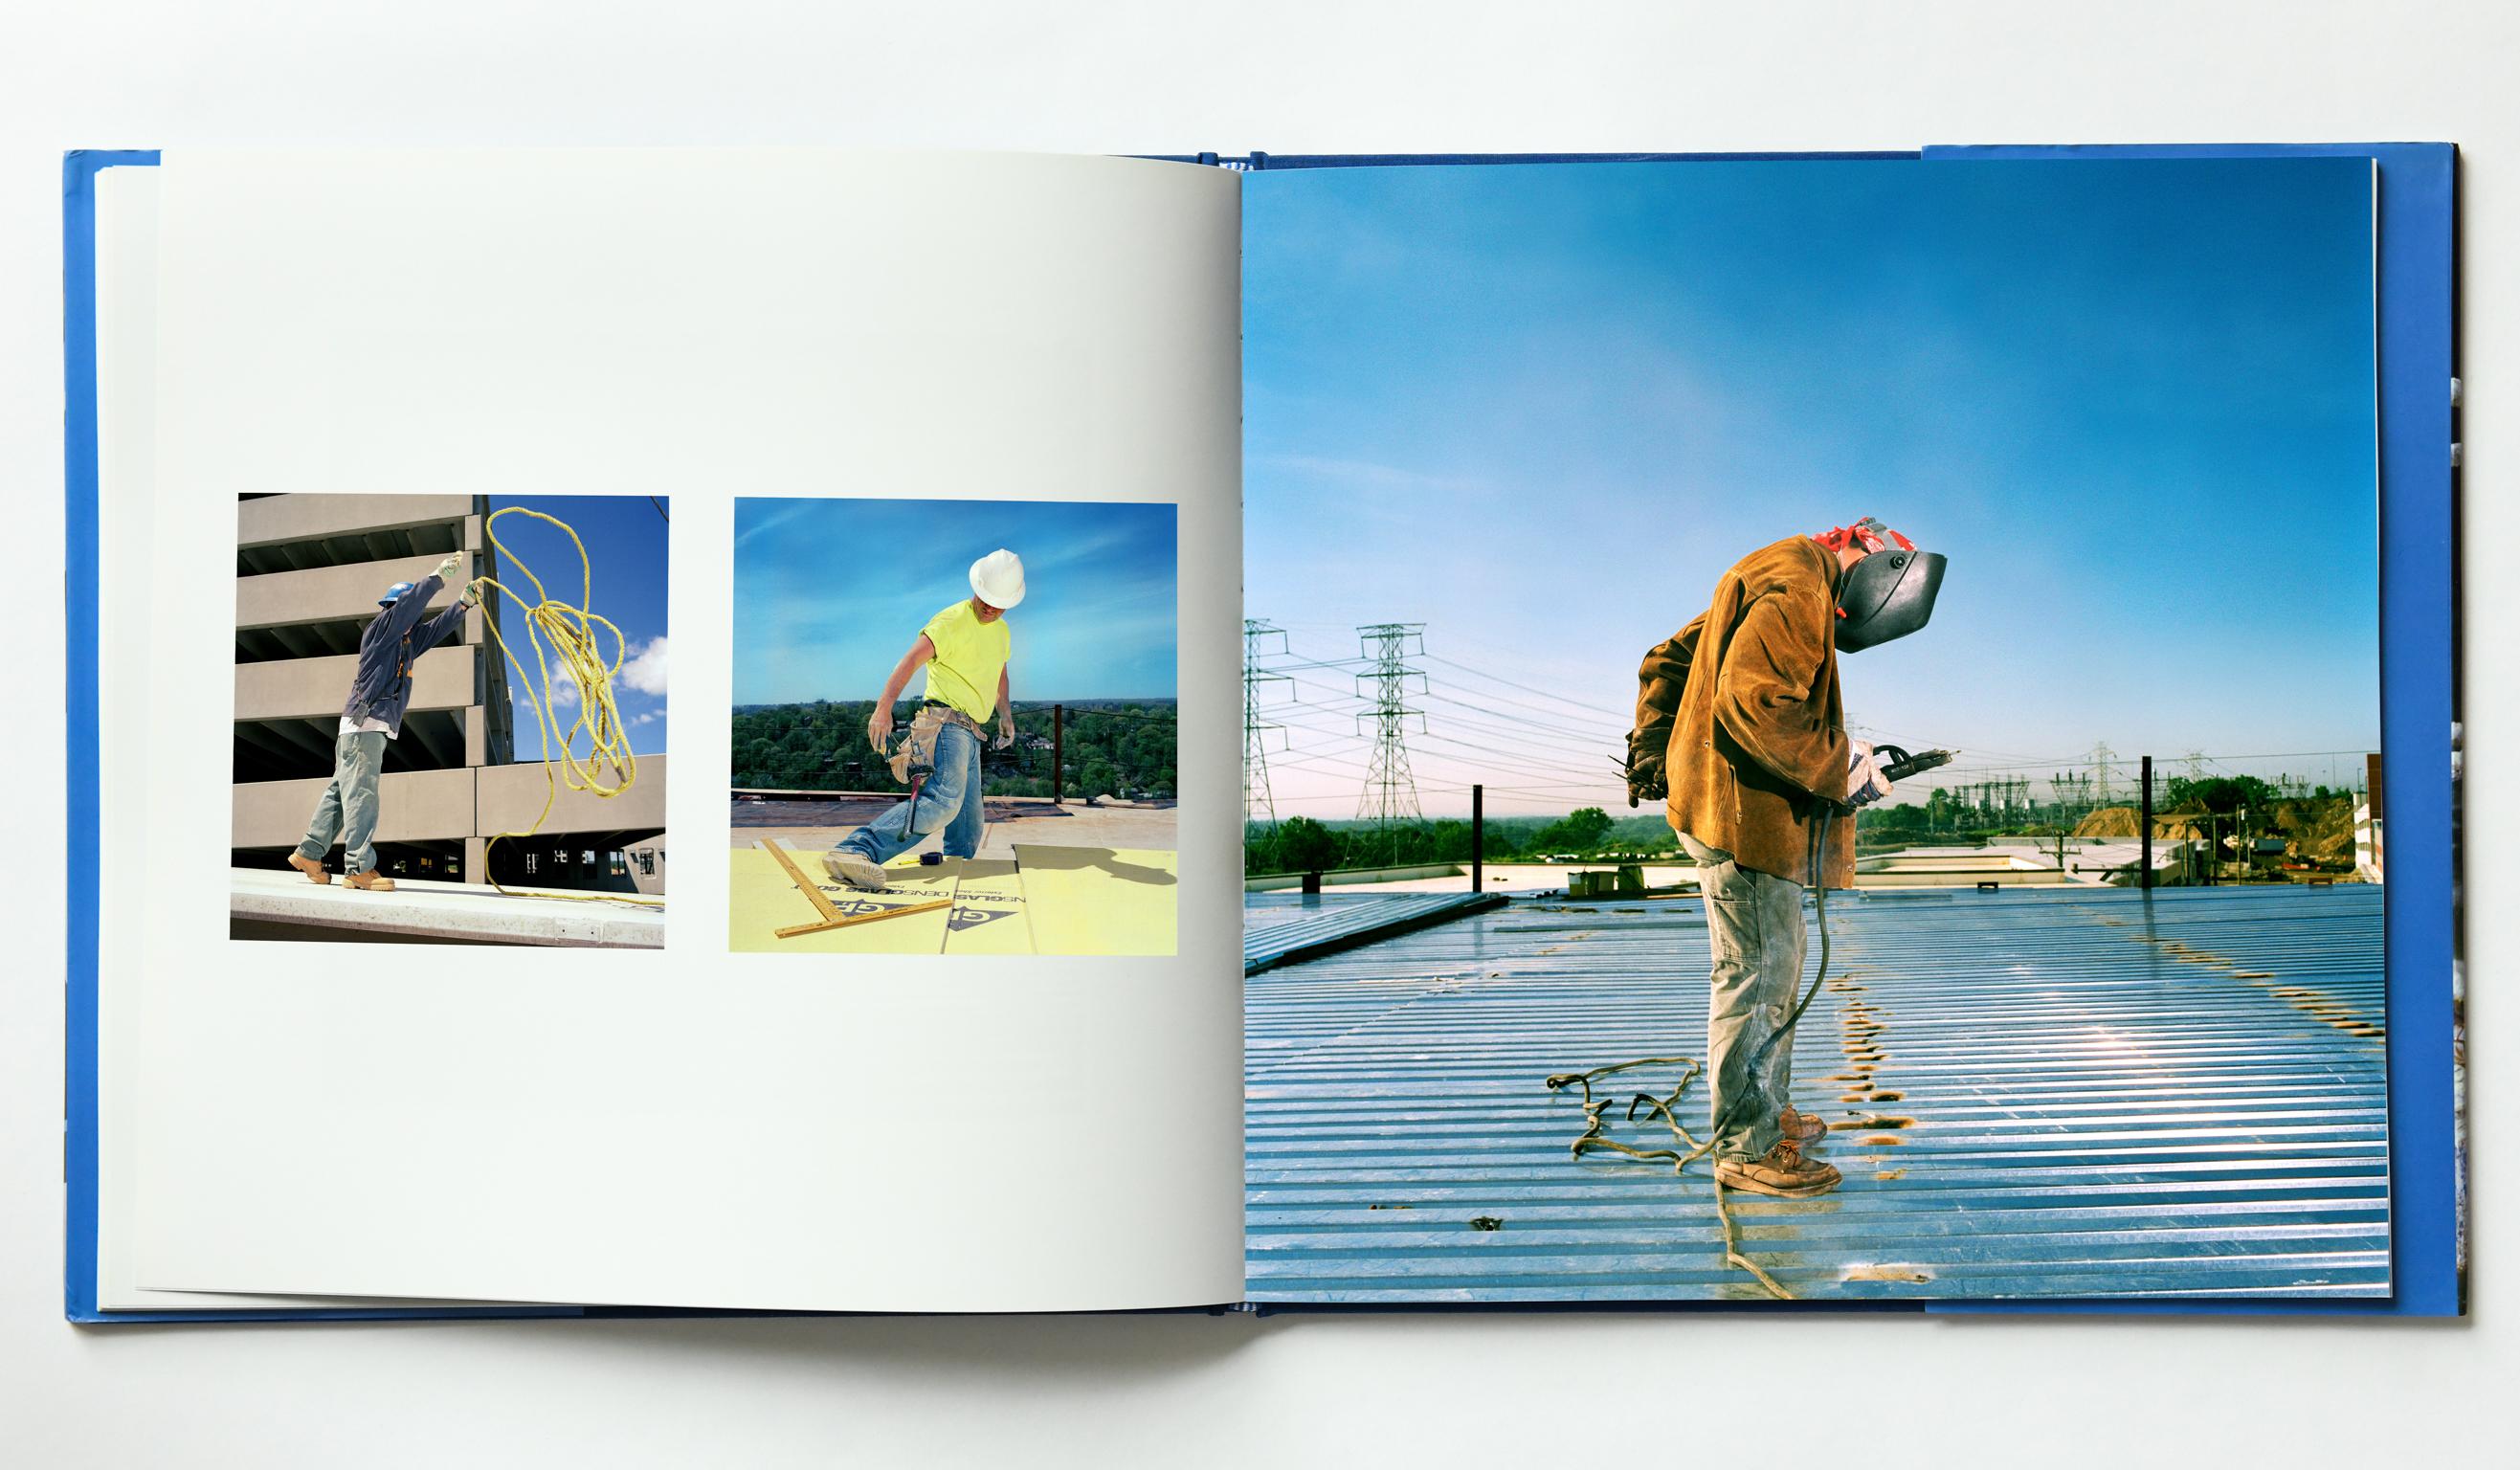 Construction
Decode Books, 2012
80 pages, 10.25 x 10.25 in
59 color photographs
Signed, $125


For his third monograph, photographer Brian Finke turns his attention to building sites. “I have always been attracted to photographing within groups,”